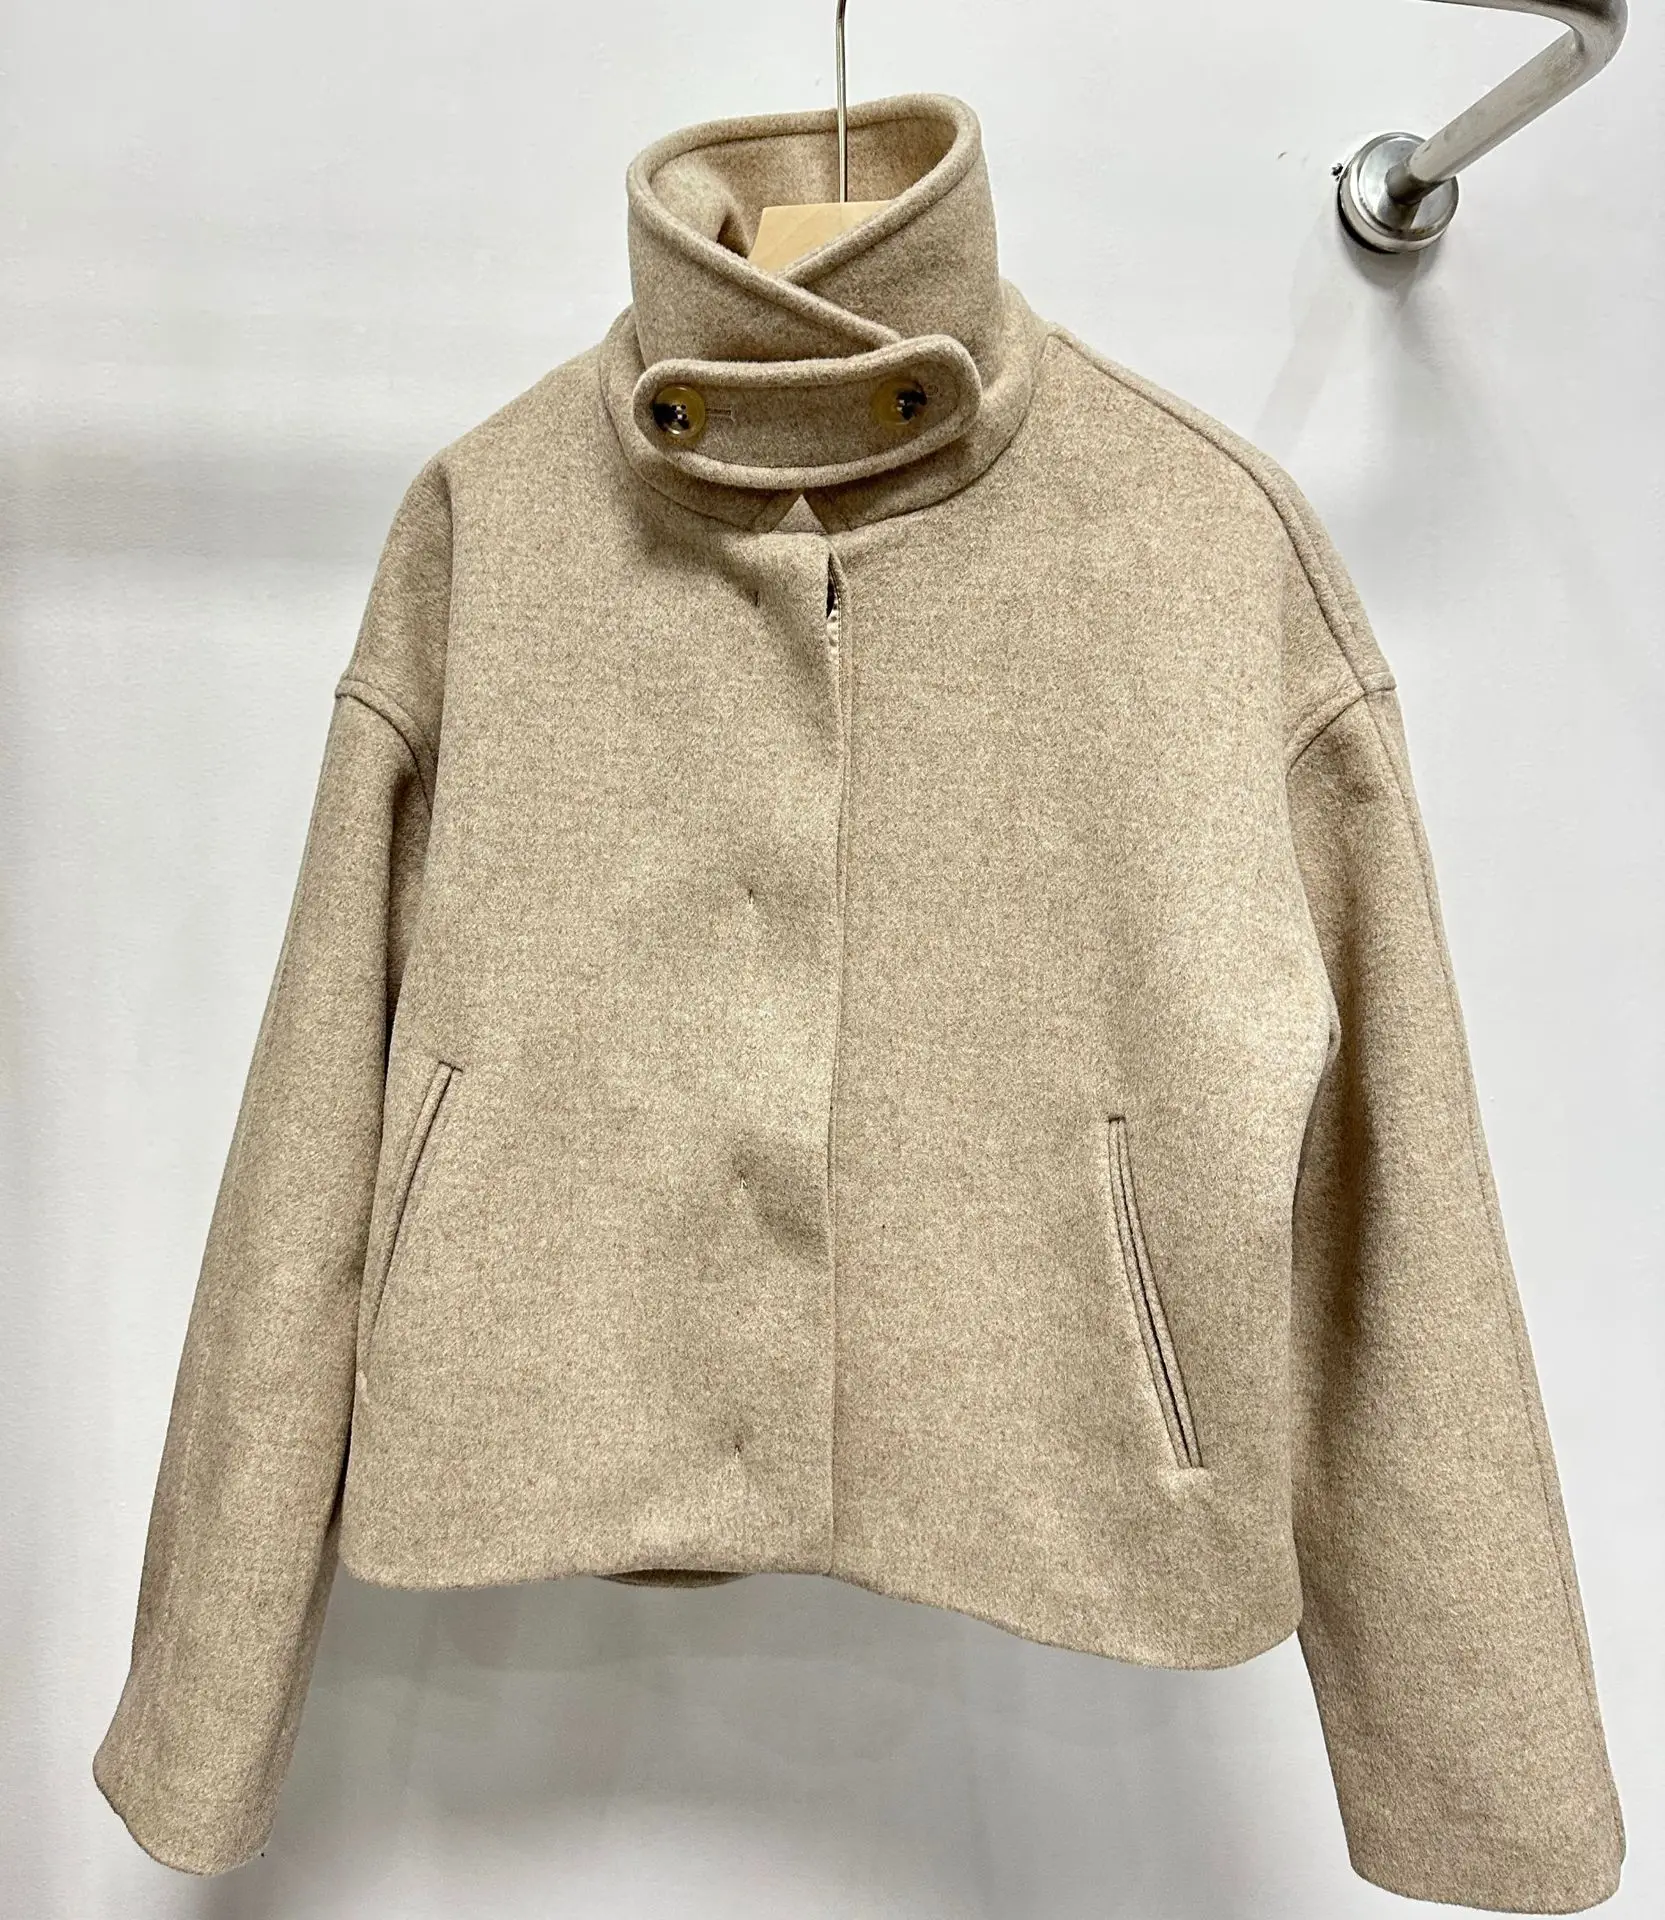 Stand-Collar Tweed Wool Coat   Women's Fall winter Spring Collar Short Small Loose Solid Color Single Row with Multiple Buttons Single-Breasted womens Jackets Woolen Coats Outerwear for woman in khaki Oatmeal beige 